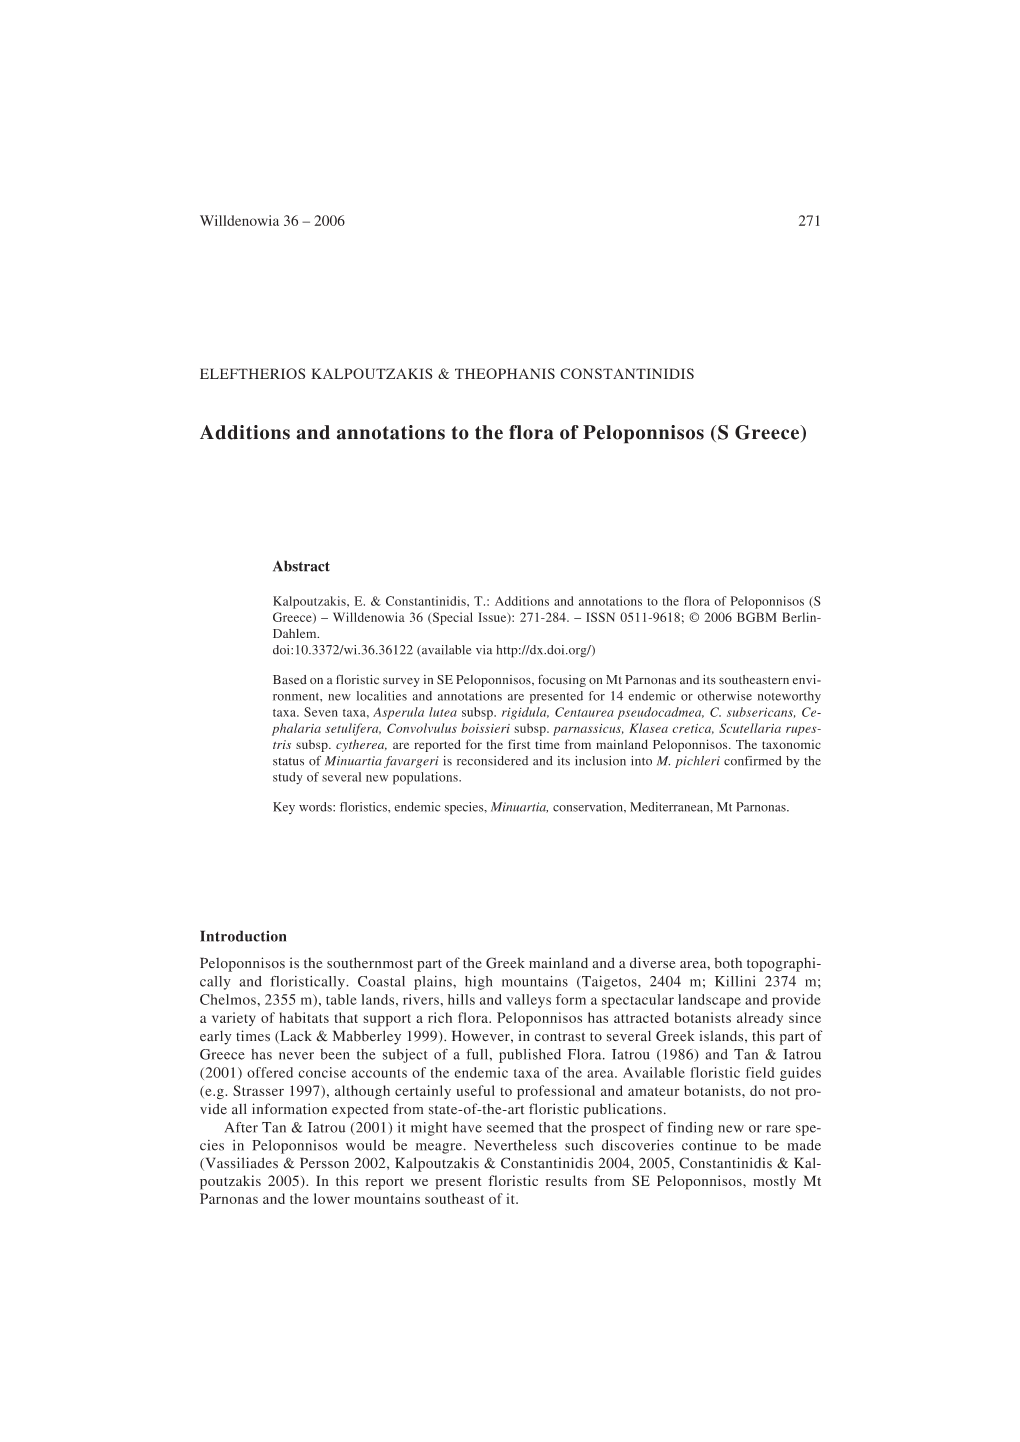 Additions and Annotations to the Flora of Peloponnisos (S Greece)